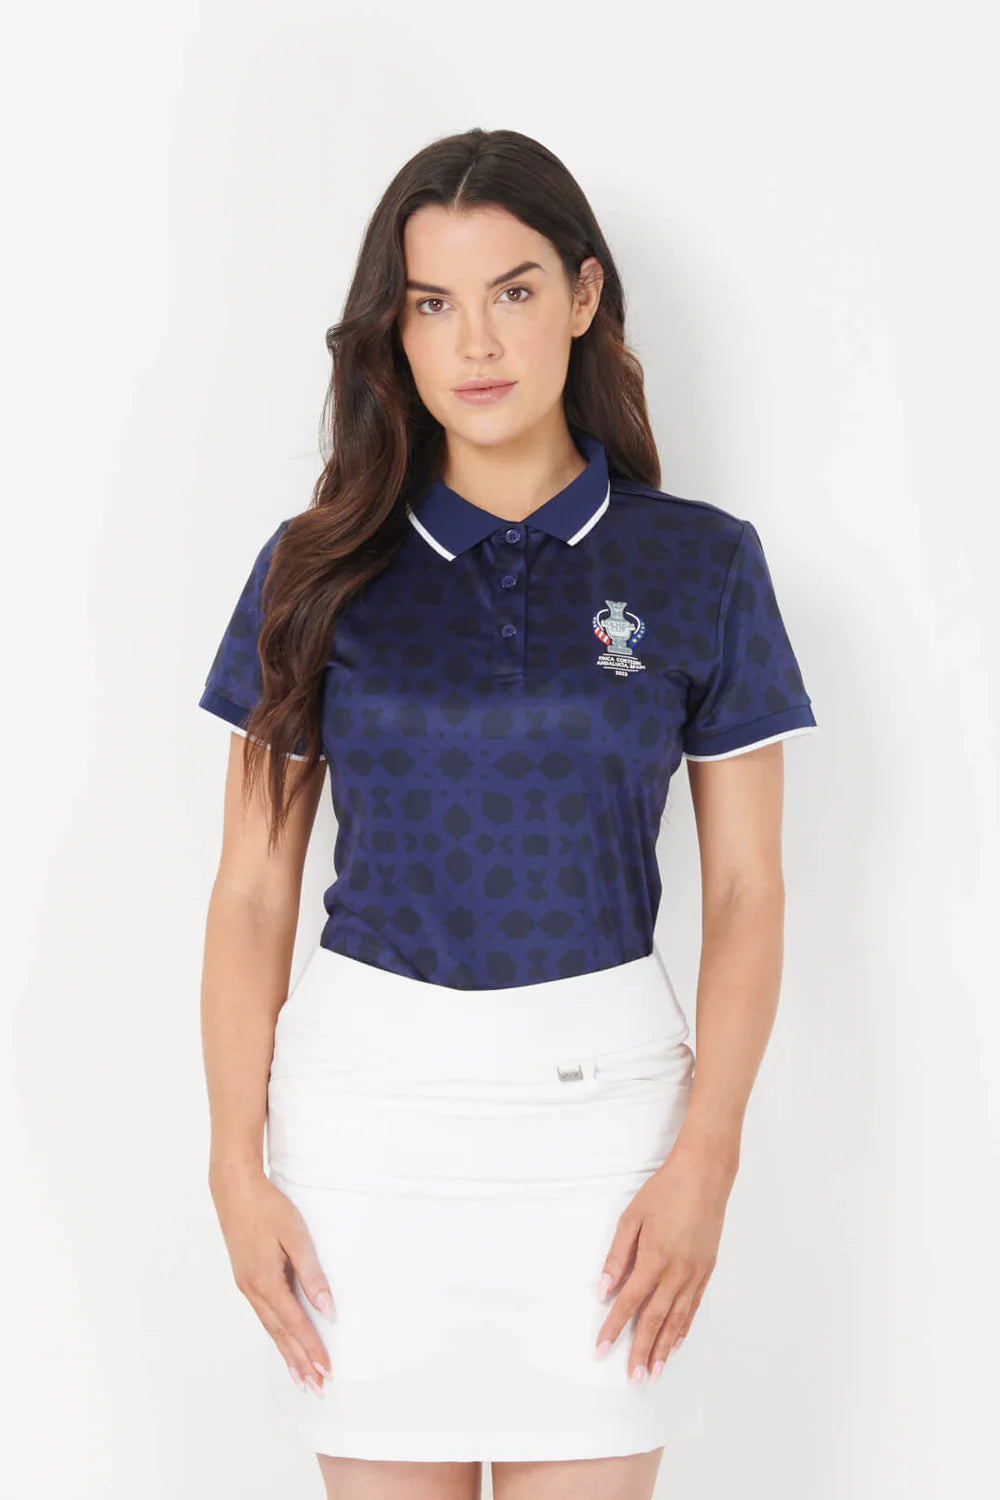 polo azul mujer oficial solheim cup 23